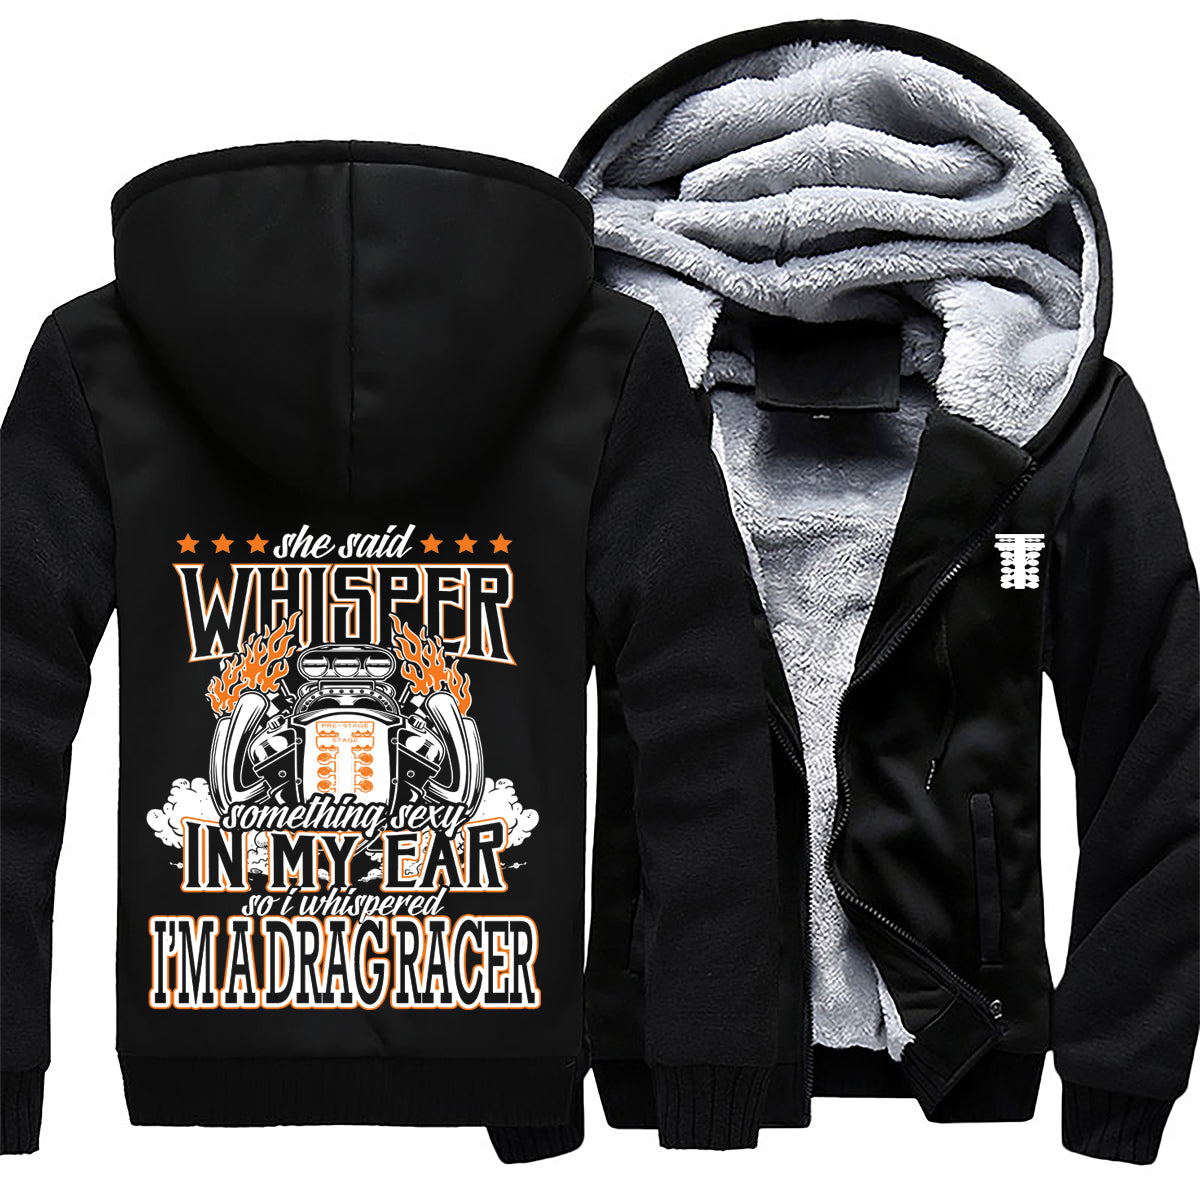 She Said Whisper Something Sexy In My Ear Drag Racer Jacket 